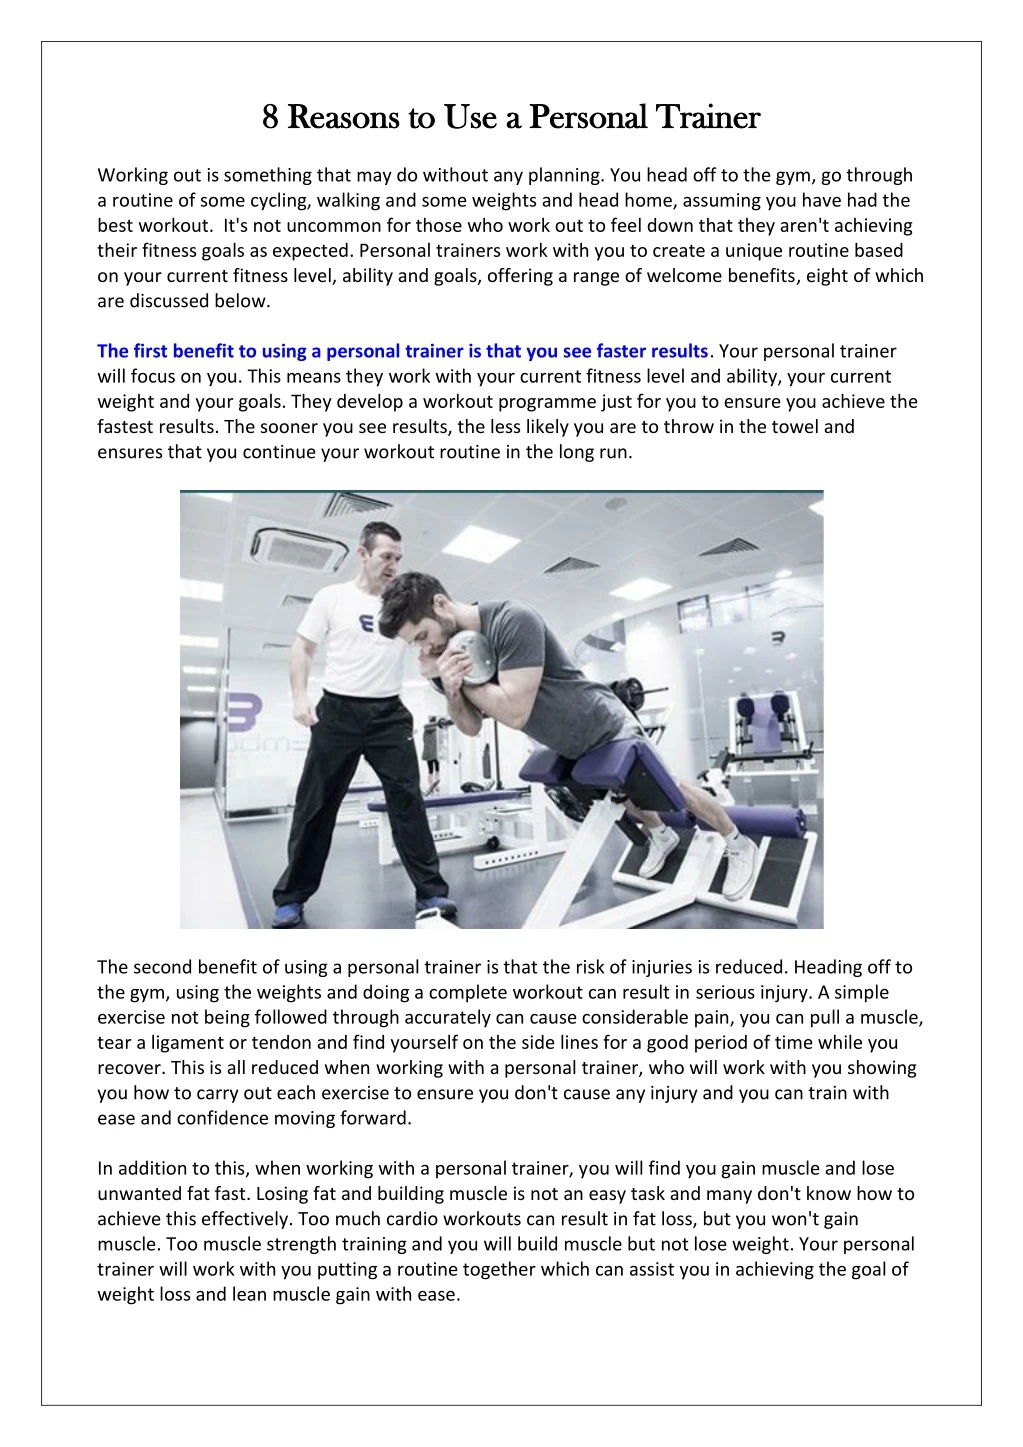 8 reasons to use a personal trainer 8 reasons